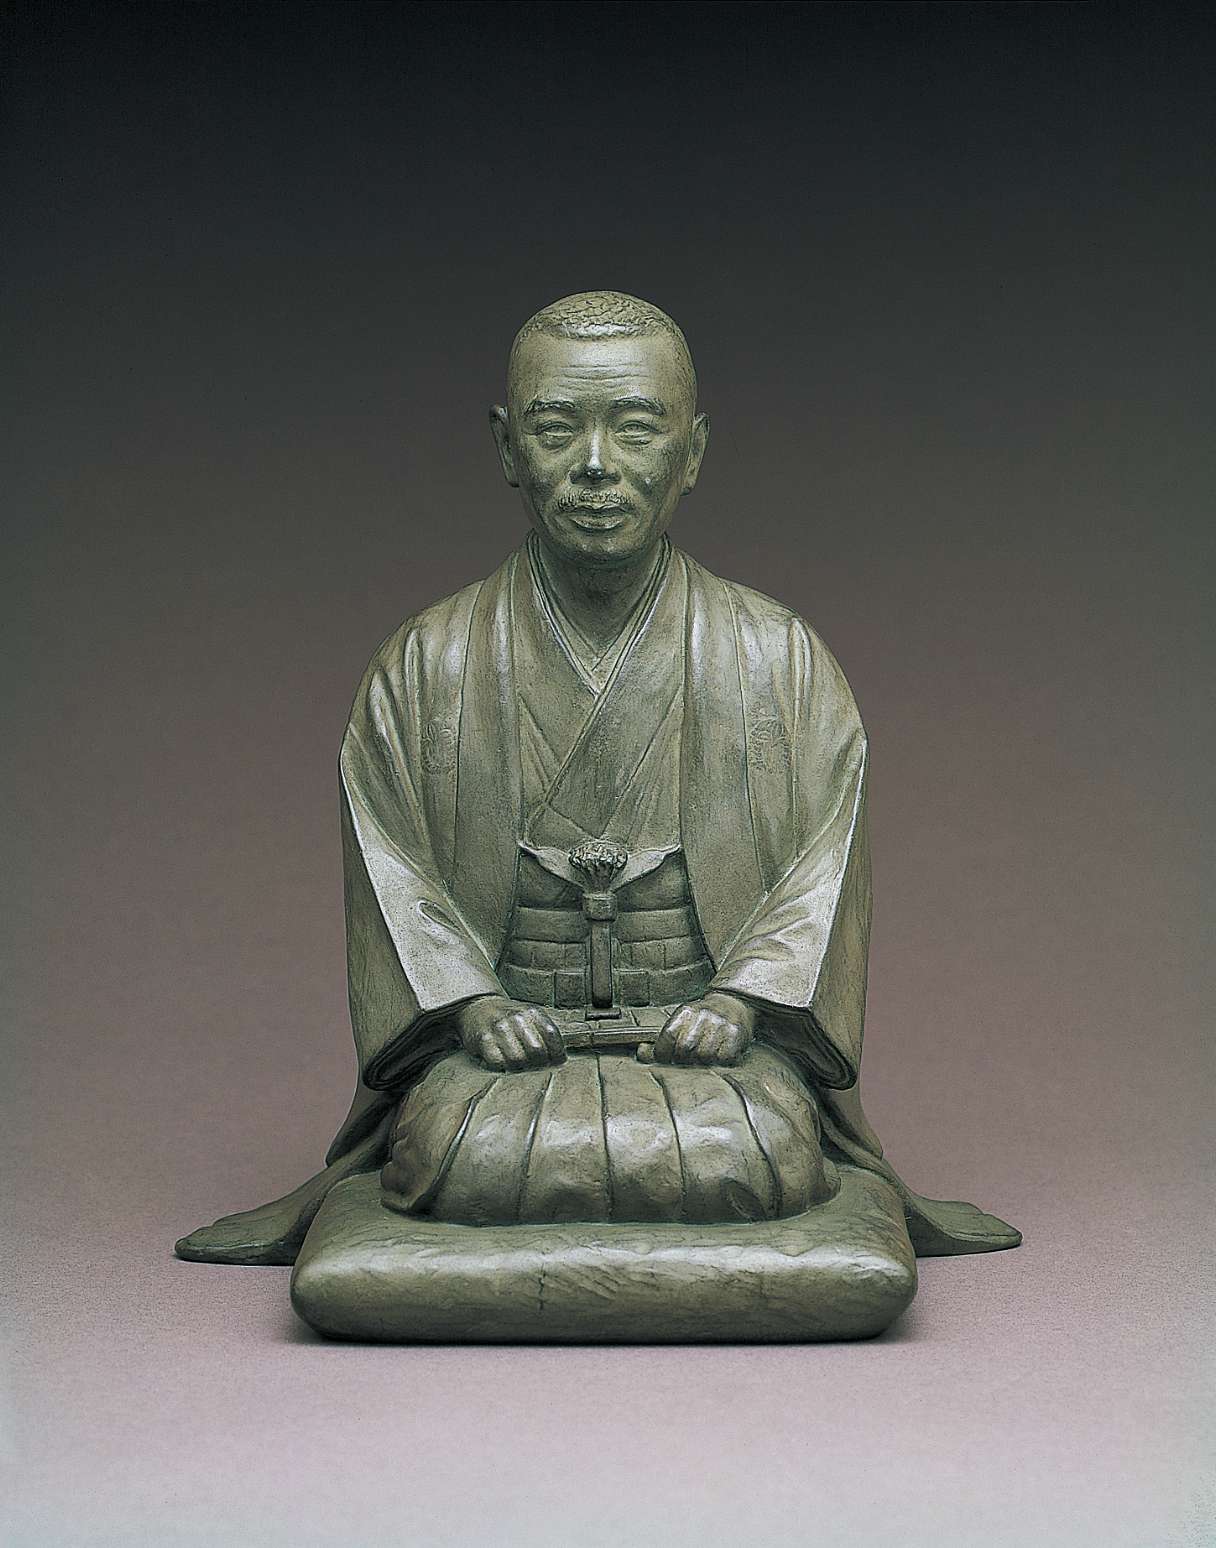 A gray, metallic statue of a late middle-aged Japanese man with close-cropped hair and a mustache wearing traditional Japanese kimono, kneeling on a cushion holding a folding fan in his lap.